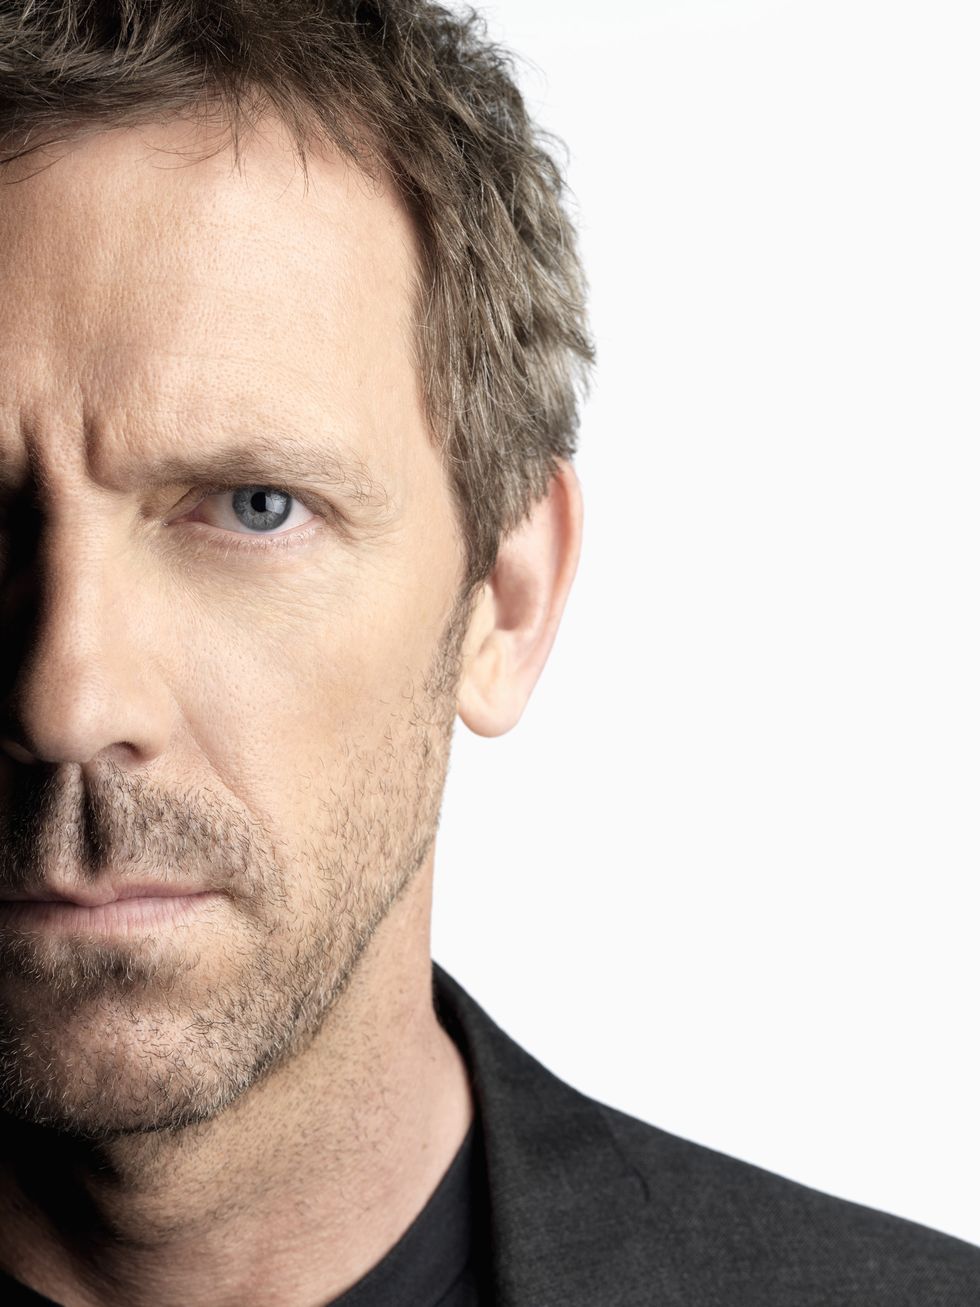 10 things you didn't know about medical drama House 